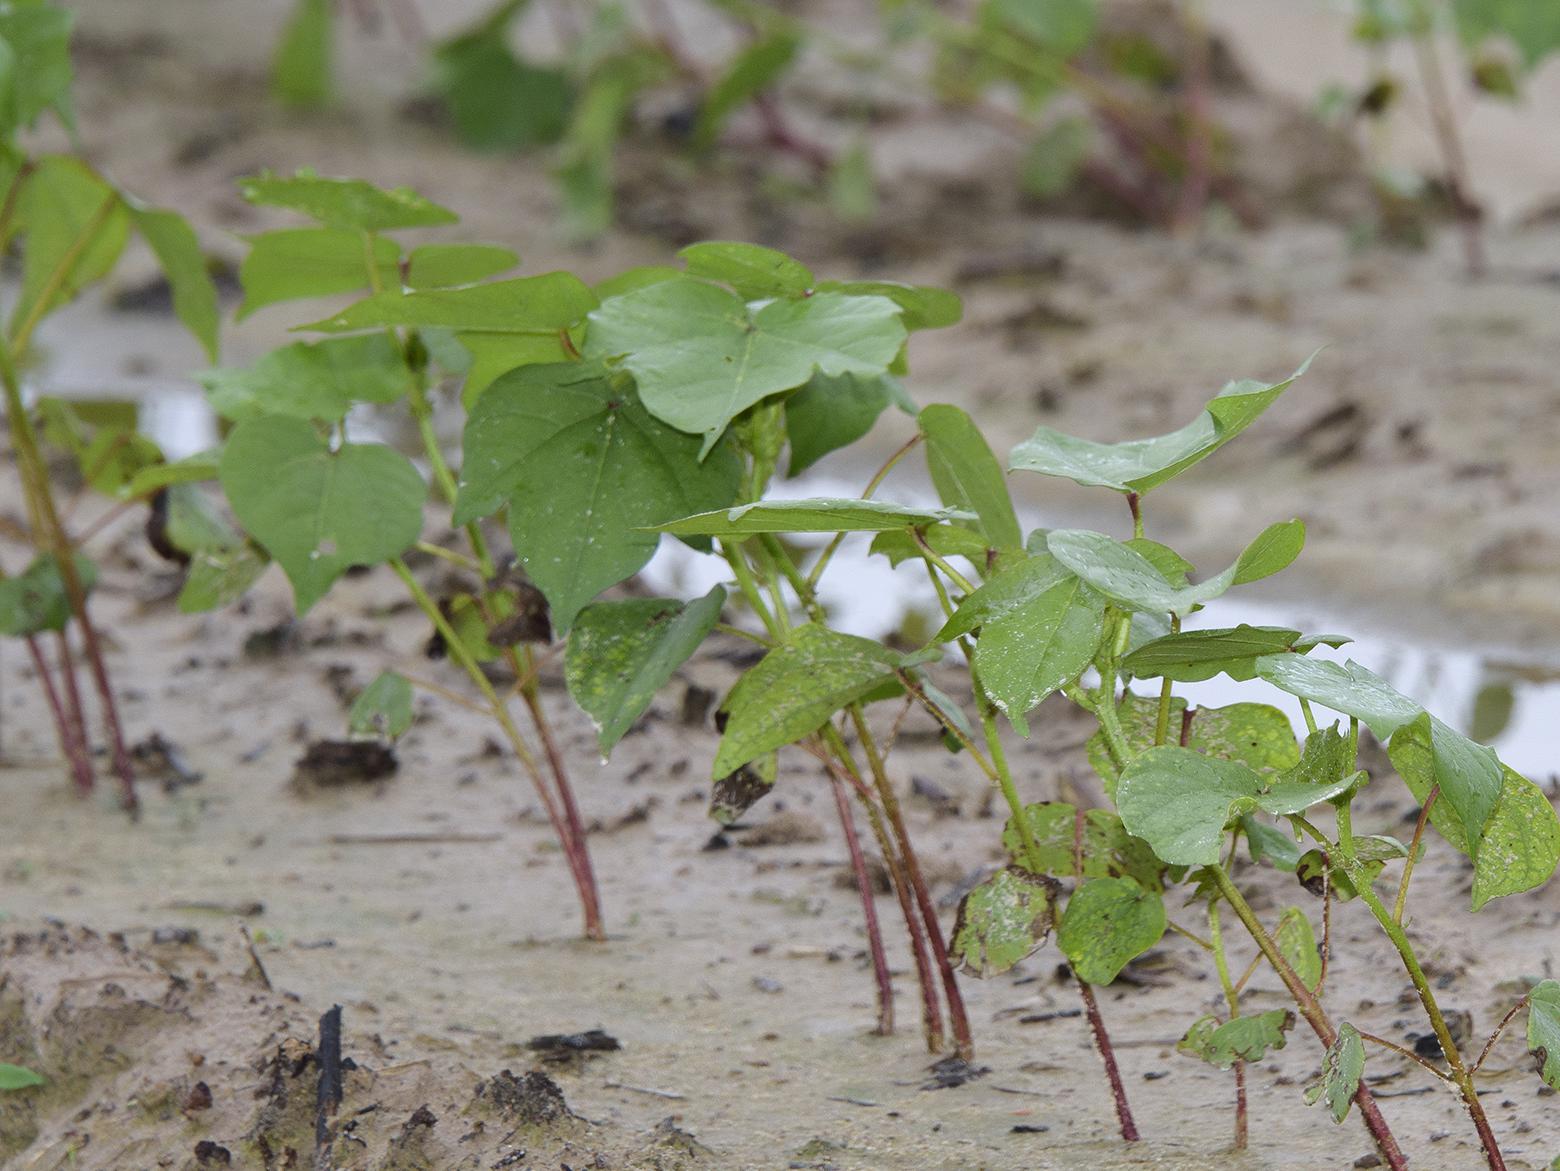 Cotton across the state has been struggling with excess rainfall but remains in good shape at this point in the season. This cotton was growing in a saturated field June 22, 2017, at Mississippi State University in Starkville. (Photo by MSU Extension Service/Kevin Hudson)